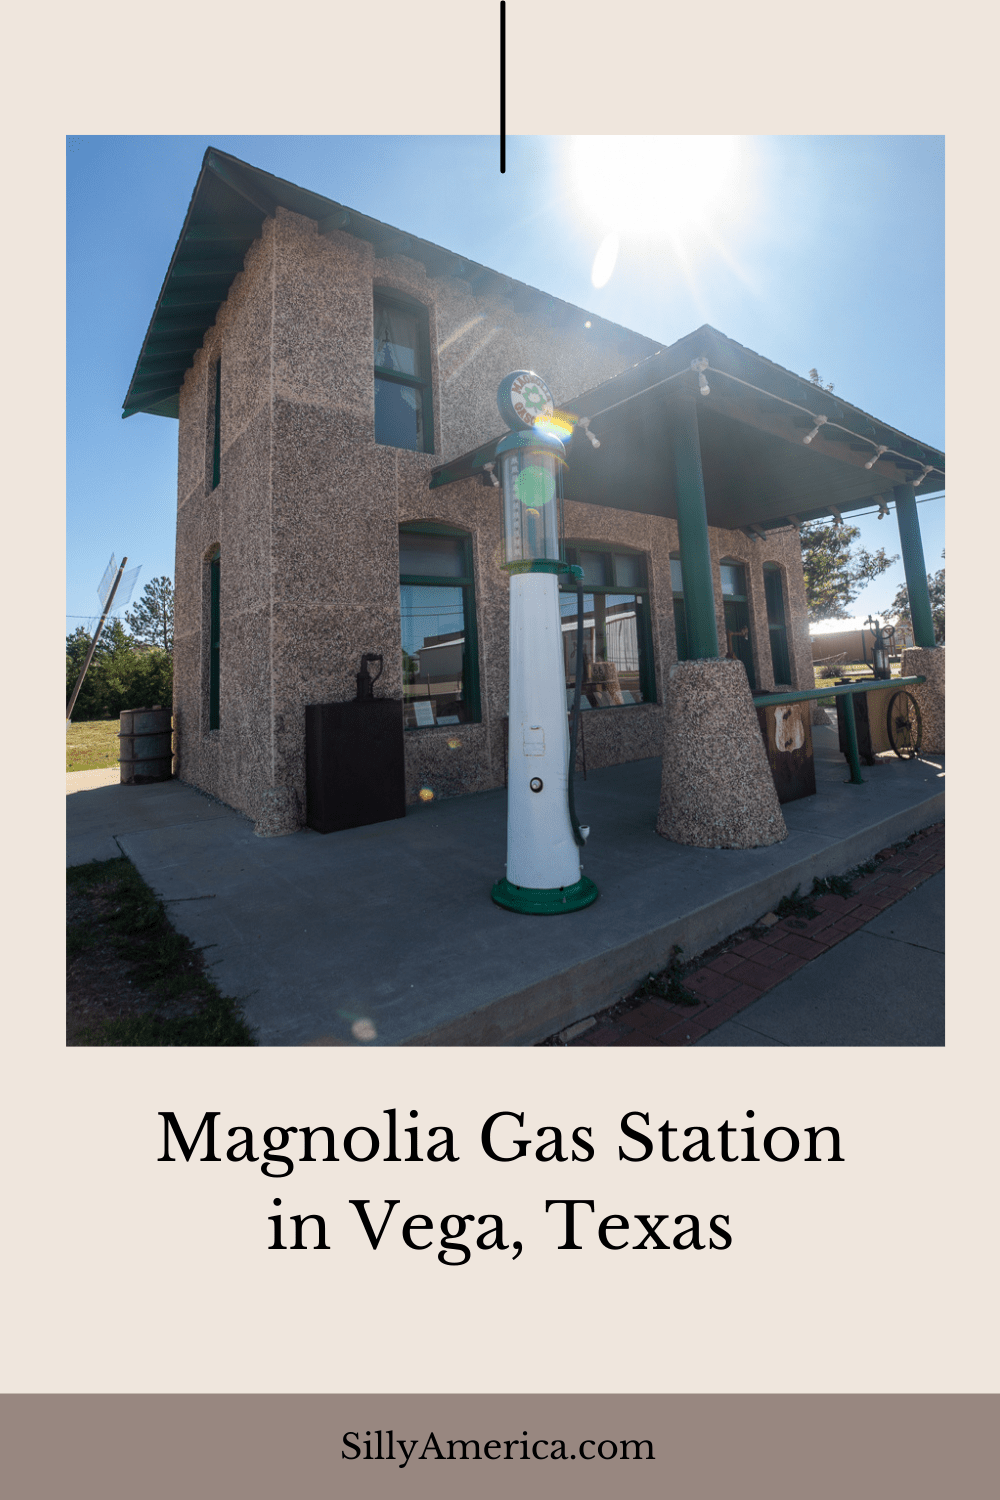 The Magnolia Gas Station in Vega, Texas was built in 1924 by Col J. T. Owen. For decades the stop fueled travelers on Route 66 and the Ozark Trail alongside locals. The two-story building allowed for the business to operate downstairs while the operator could live in an apartment upstairs.  #RoadTrips #RoadTripStop #Route66 #Route66RoadTrip #TexasRoute66 #Texas #TexasRoadTrip #TexasRoadsideAttractions #RoadsideAttractions #RoadsideAttraction #RoadsideAmerica #RoadTrip